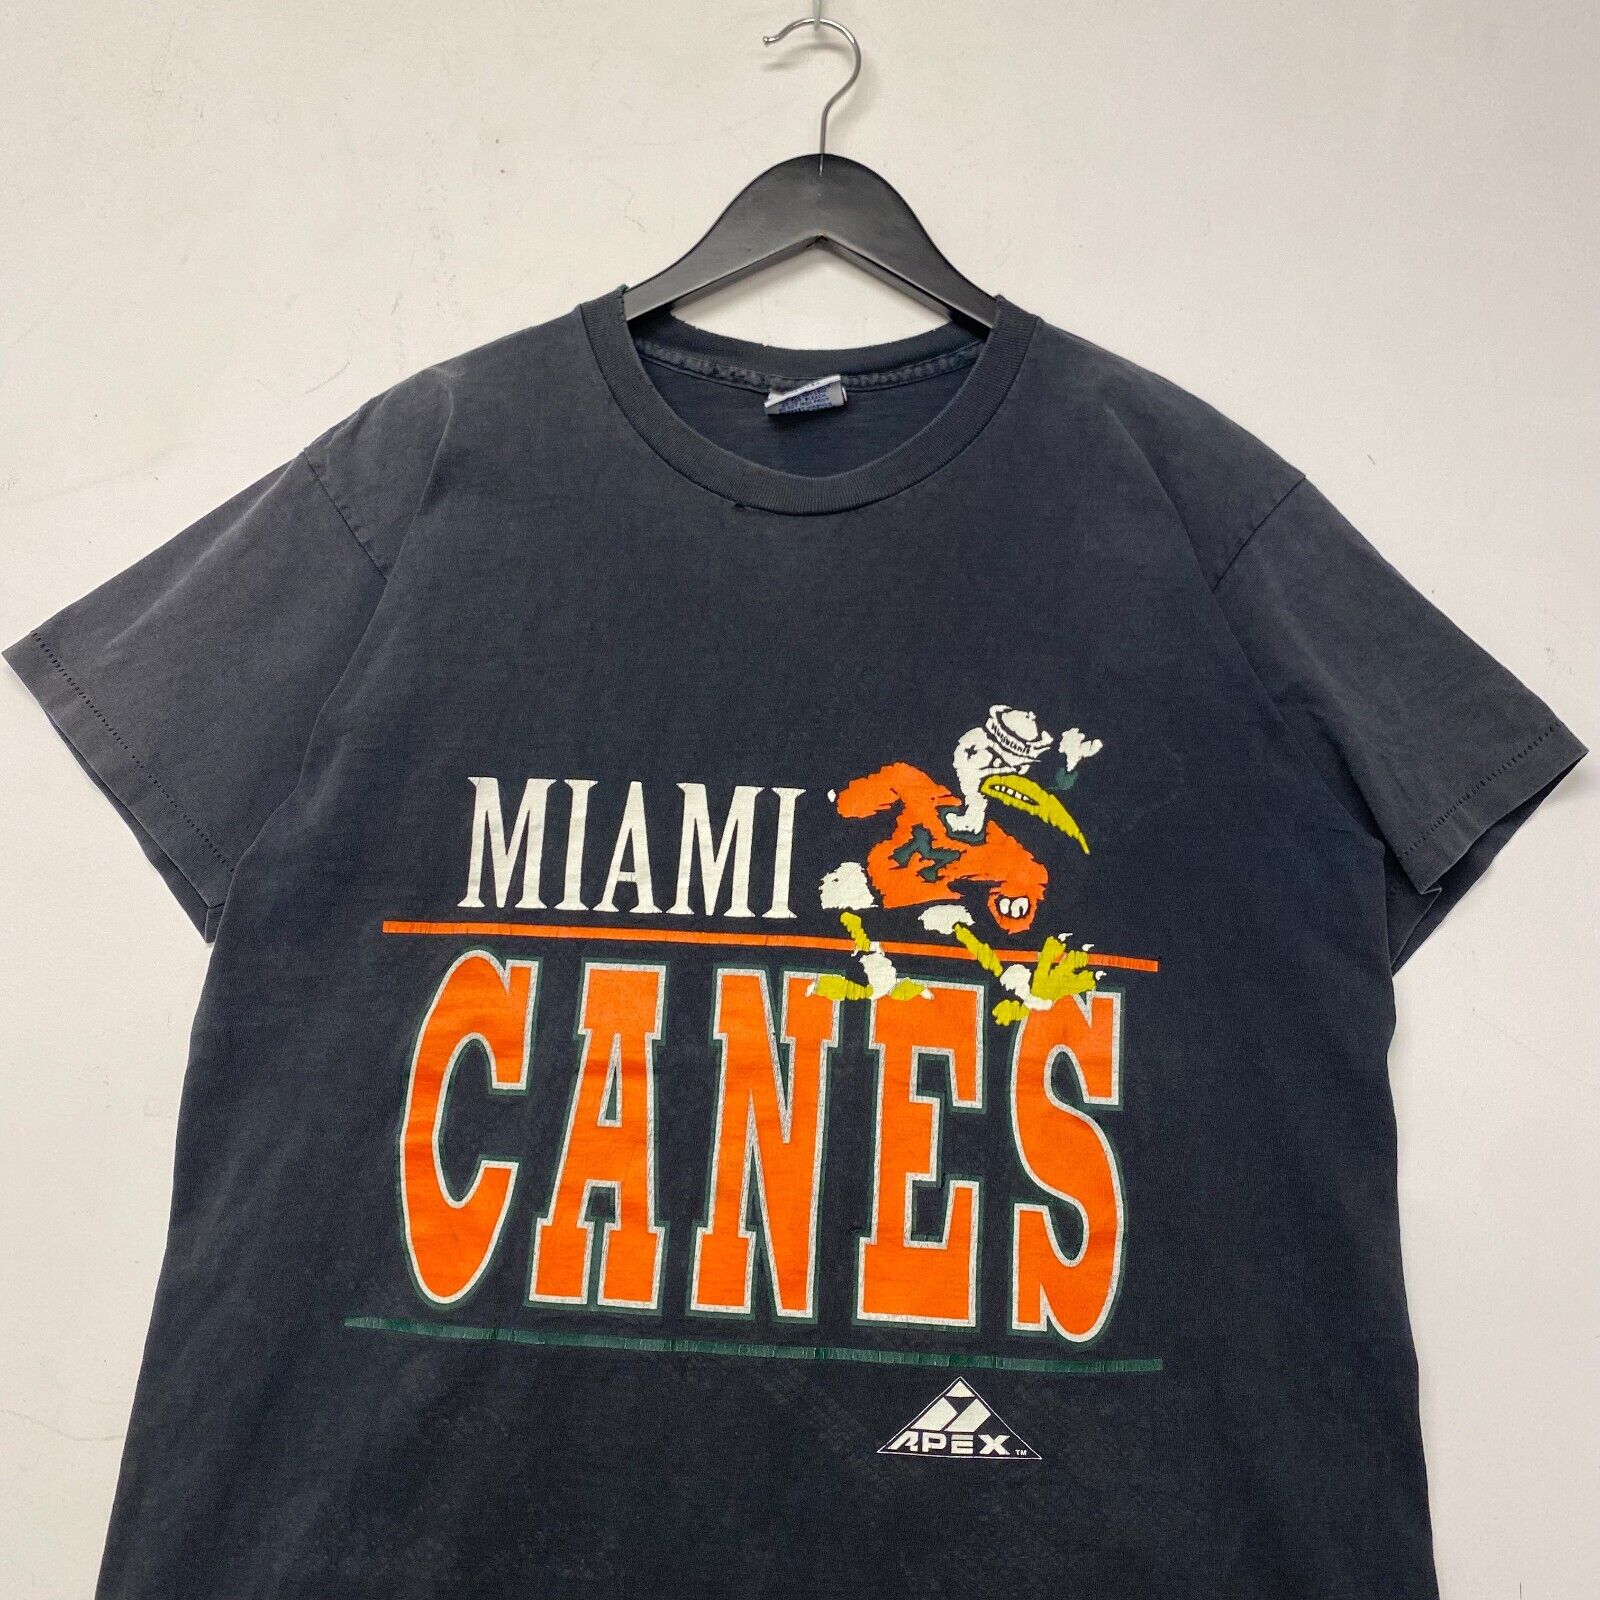 Vintage Miami University Canes 1990s Dark Gray T-Shirt Size L Made in USA